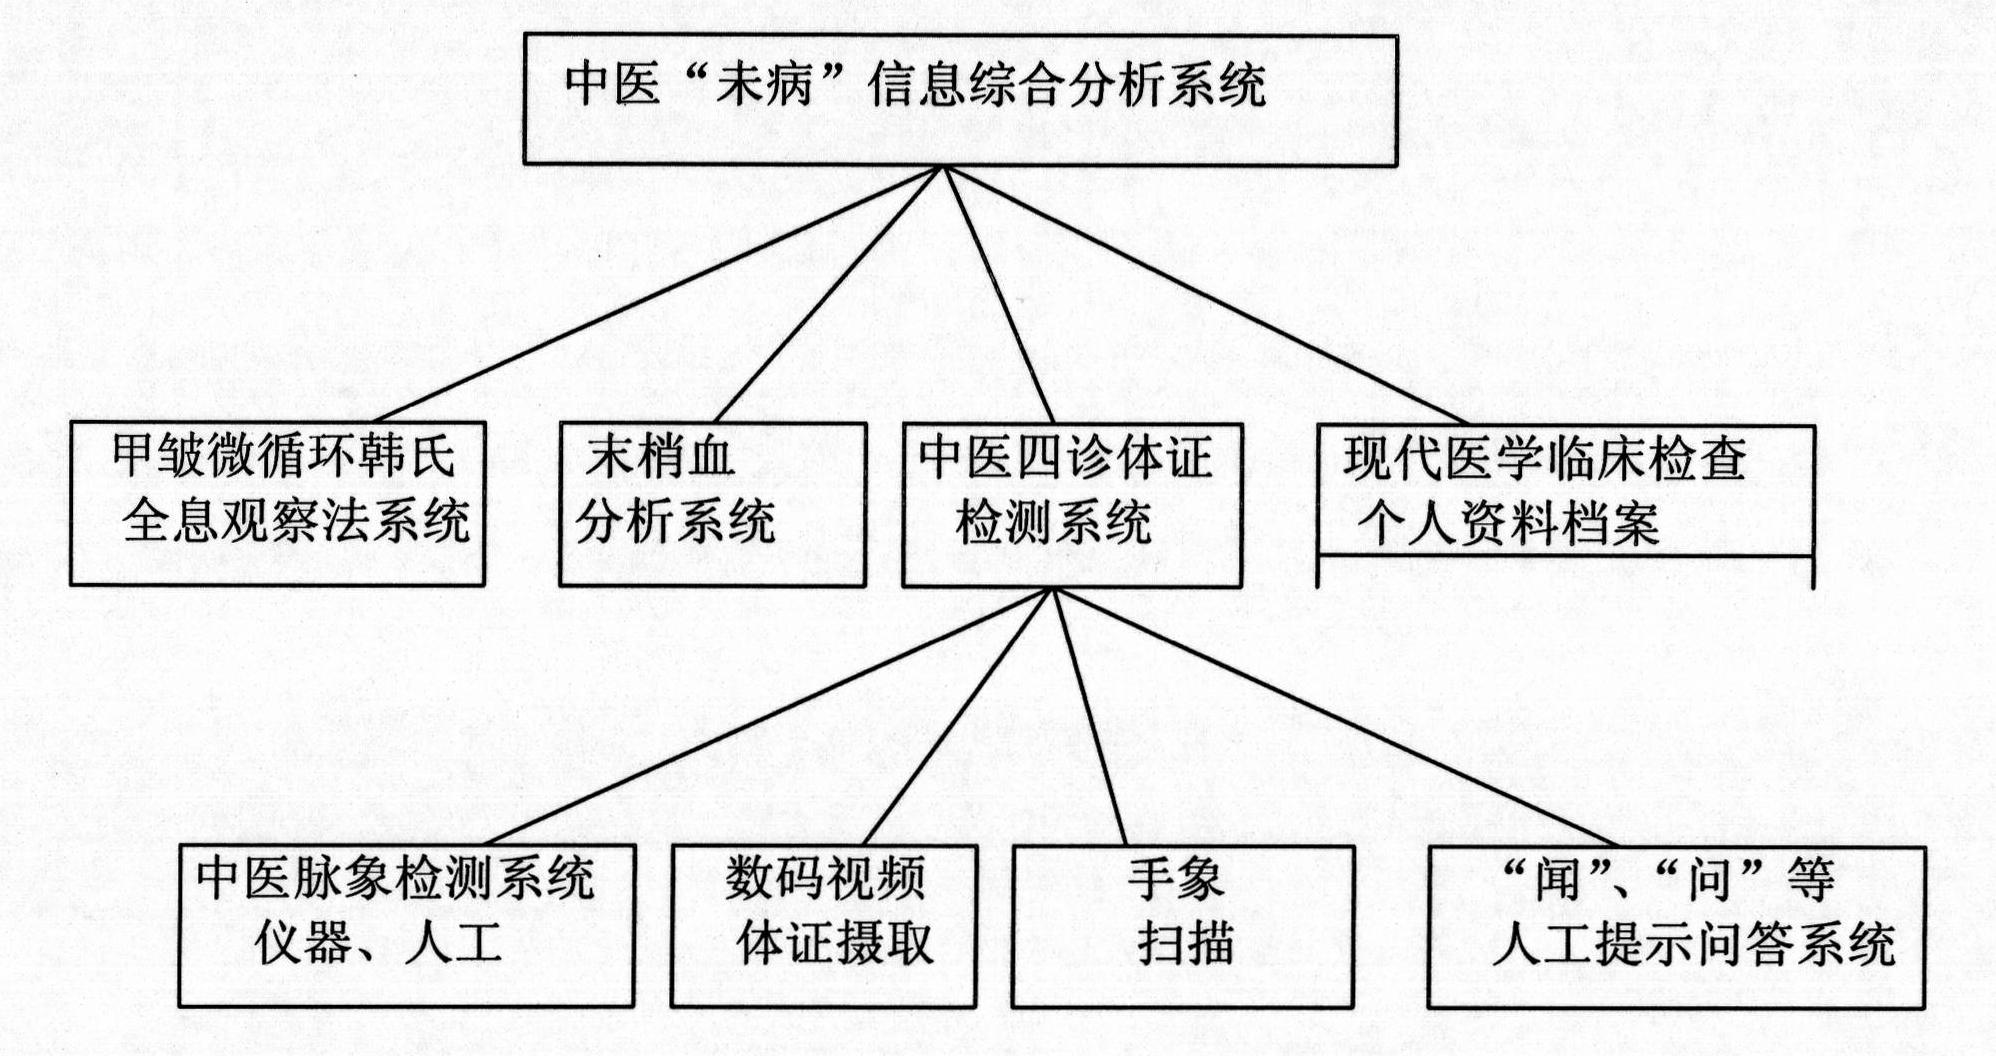 Potential disease information comprehensive analysis system of modern traditional Chinese medicine